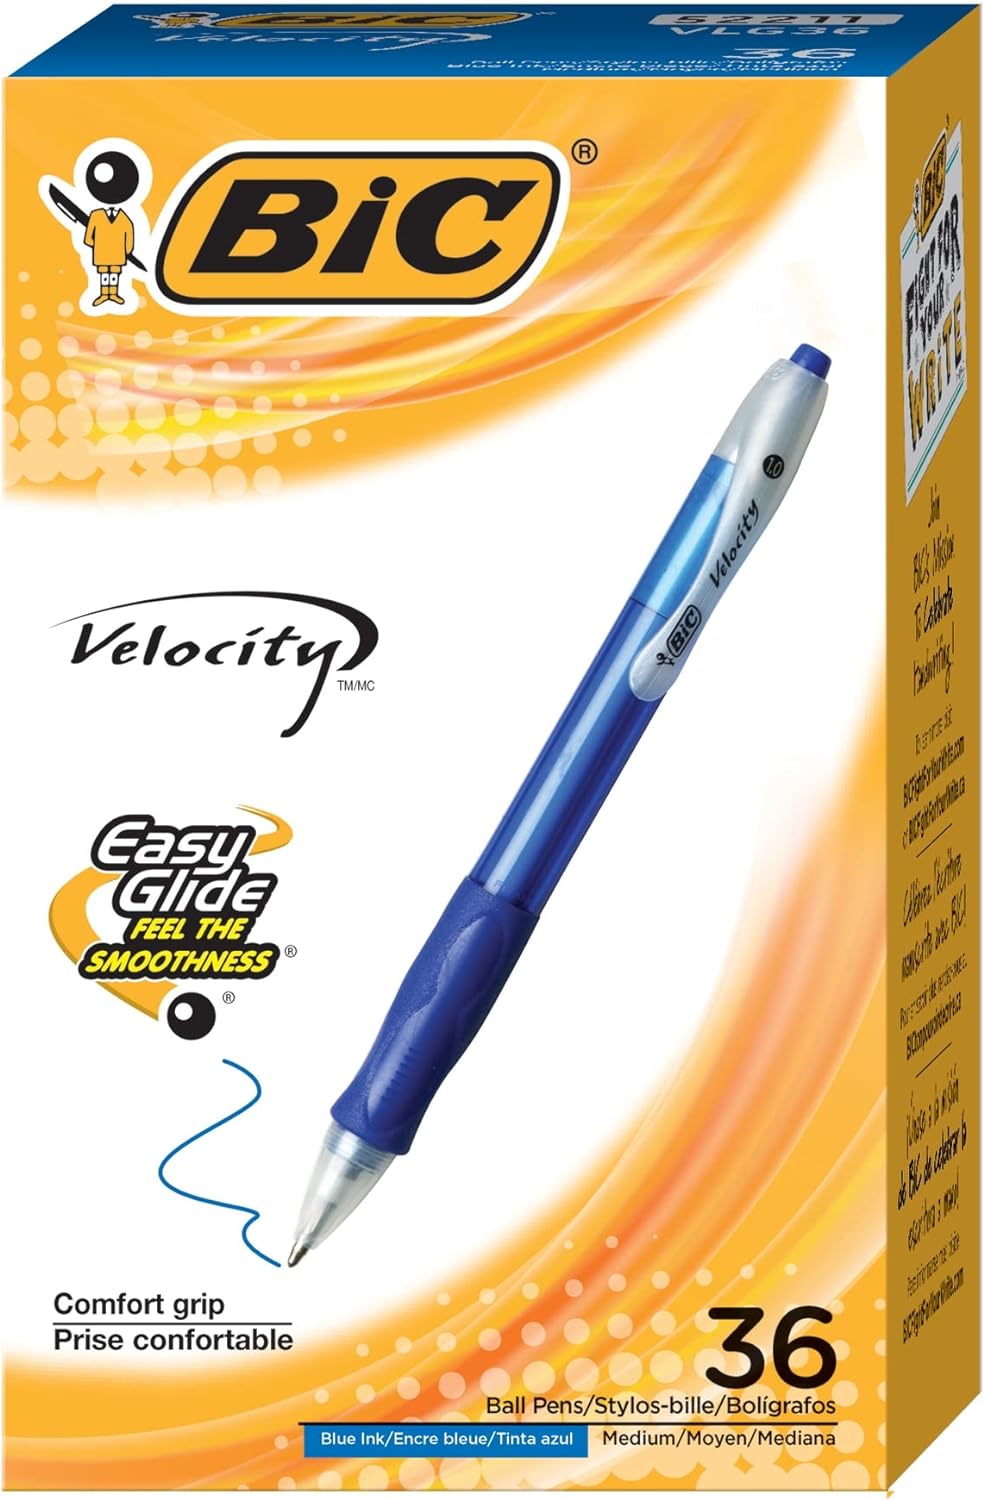 Great pens! I like that they are chubbier than regular pens